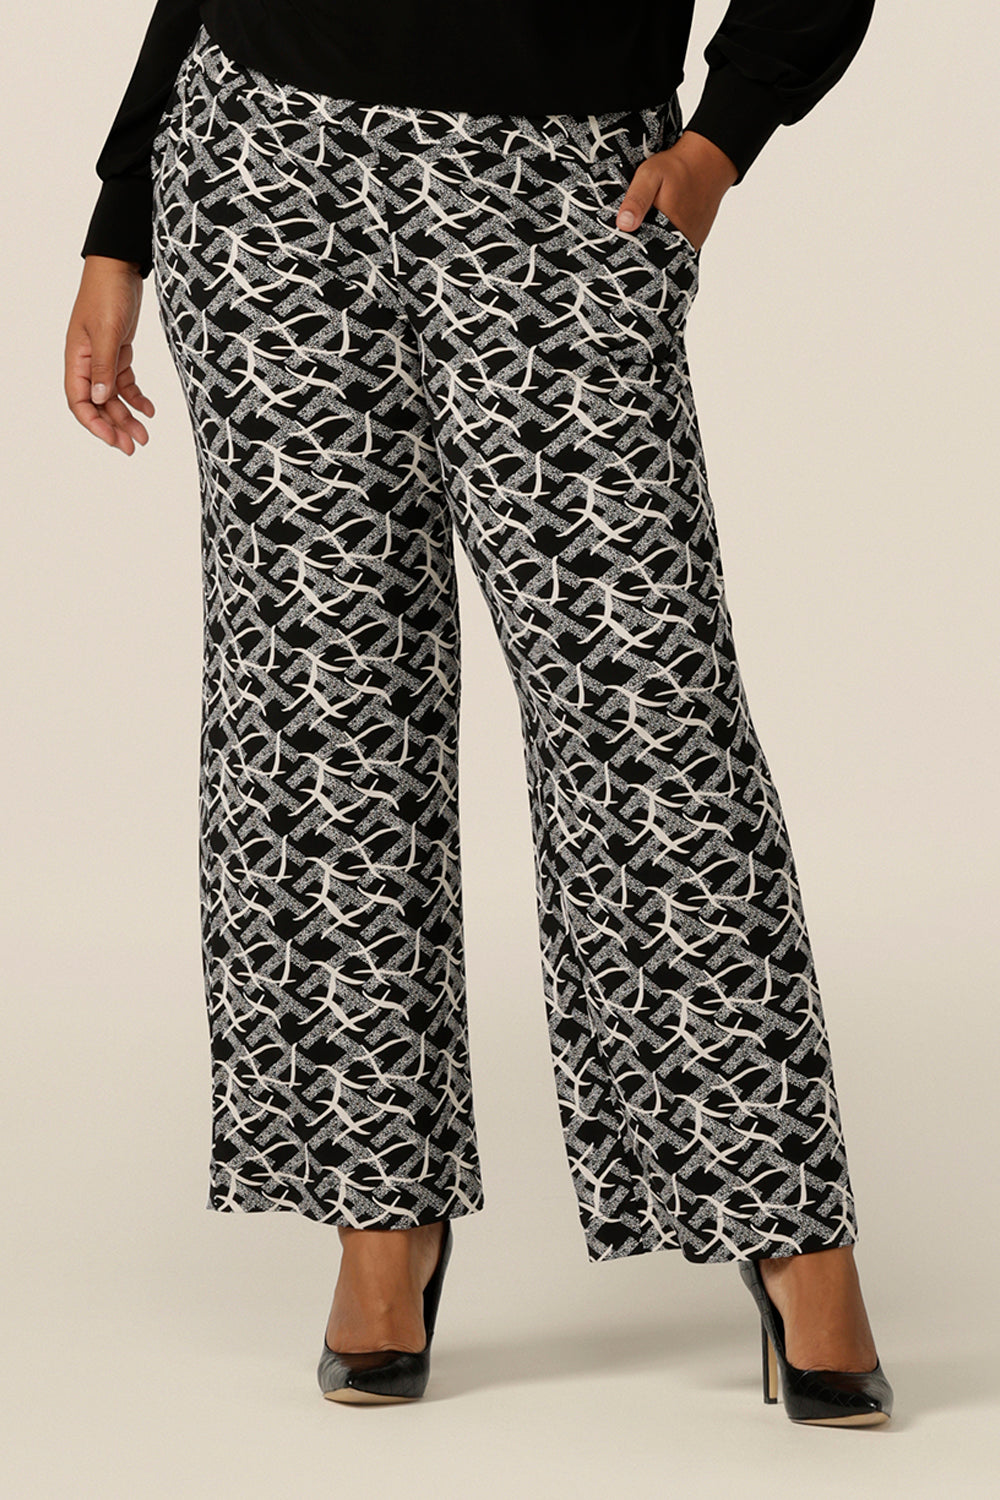 A plus size, size 18 woman wears wide leg, pull on pants with a deep waistband in black and white jersey. Australian-made, these easy care pants are great for work and corporate wear.